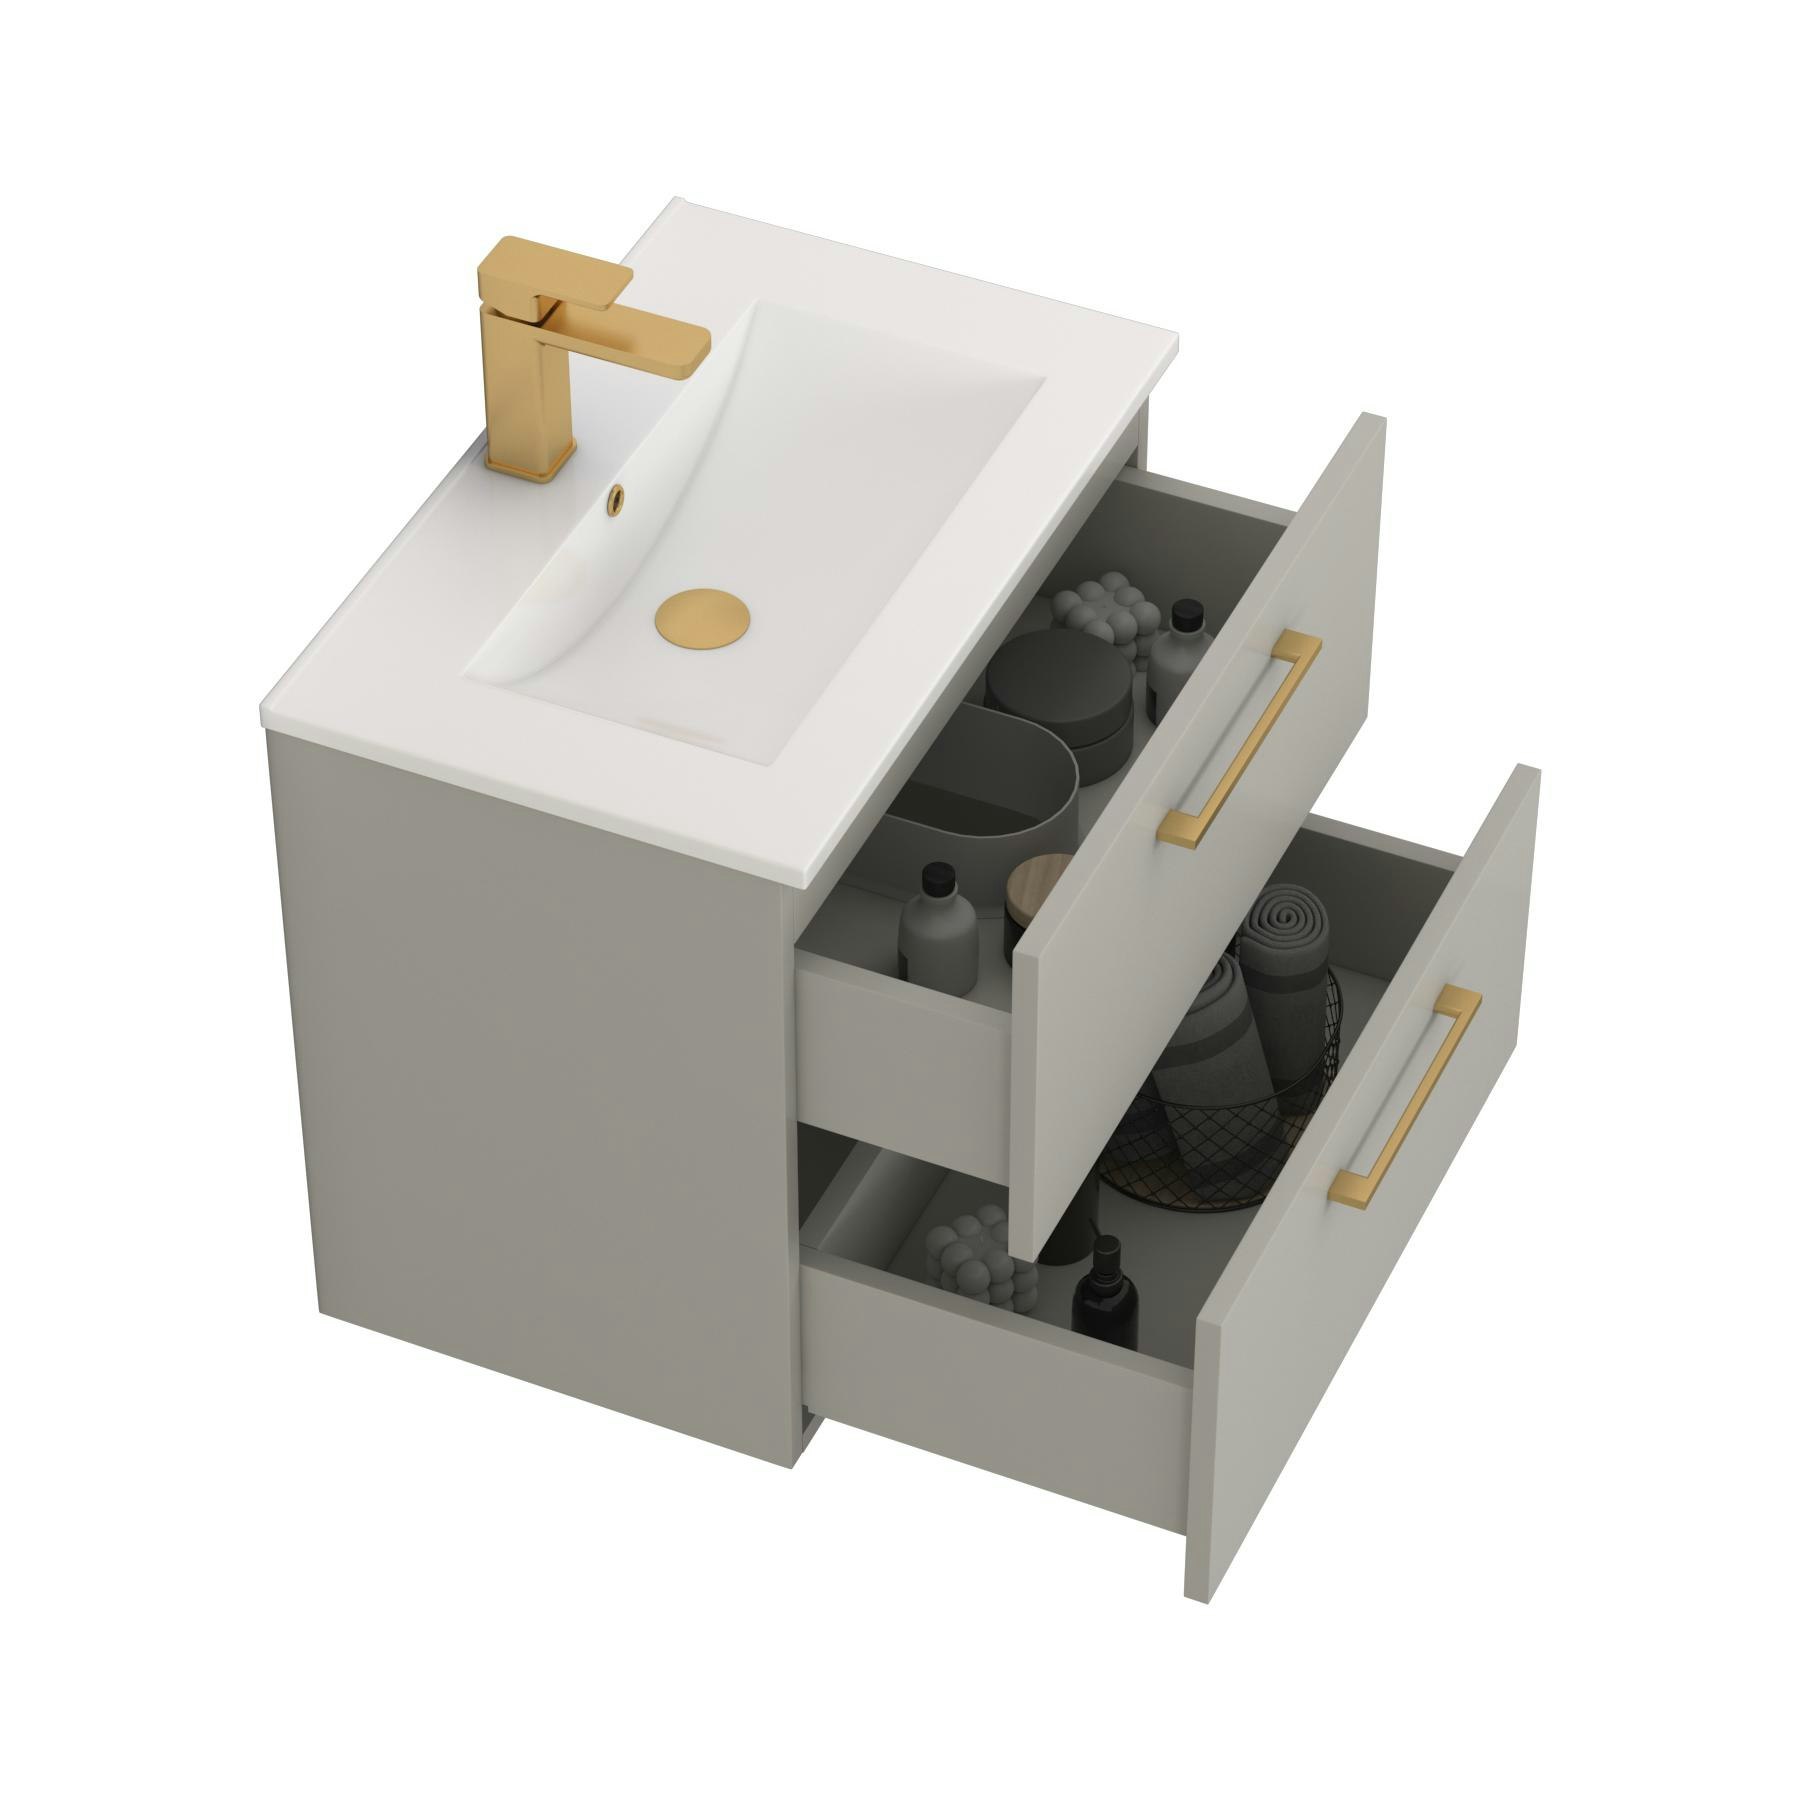 Modena 800mm Satin Grey Wall Hung Vanity Unit 2 Drawer Mid-Edge Basin With Brushed Brass Handle